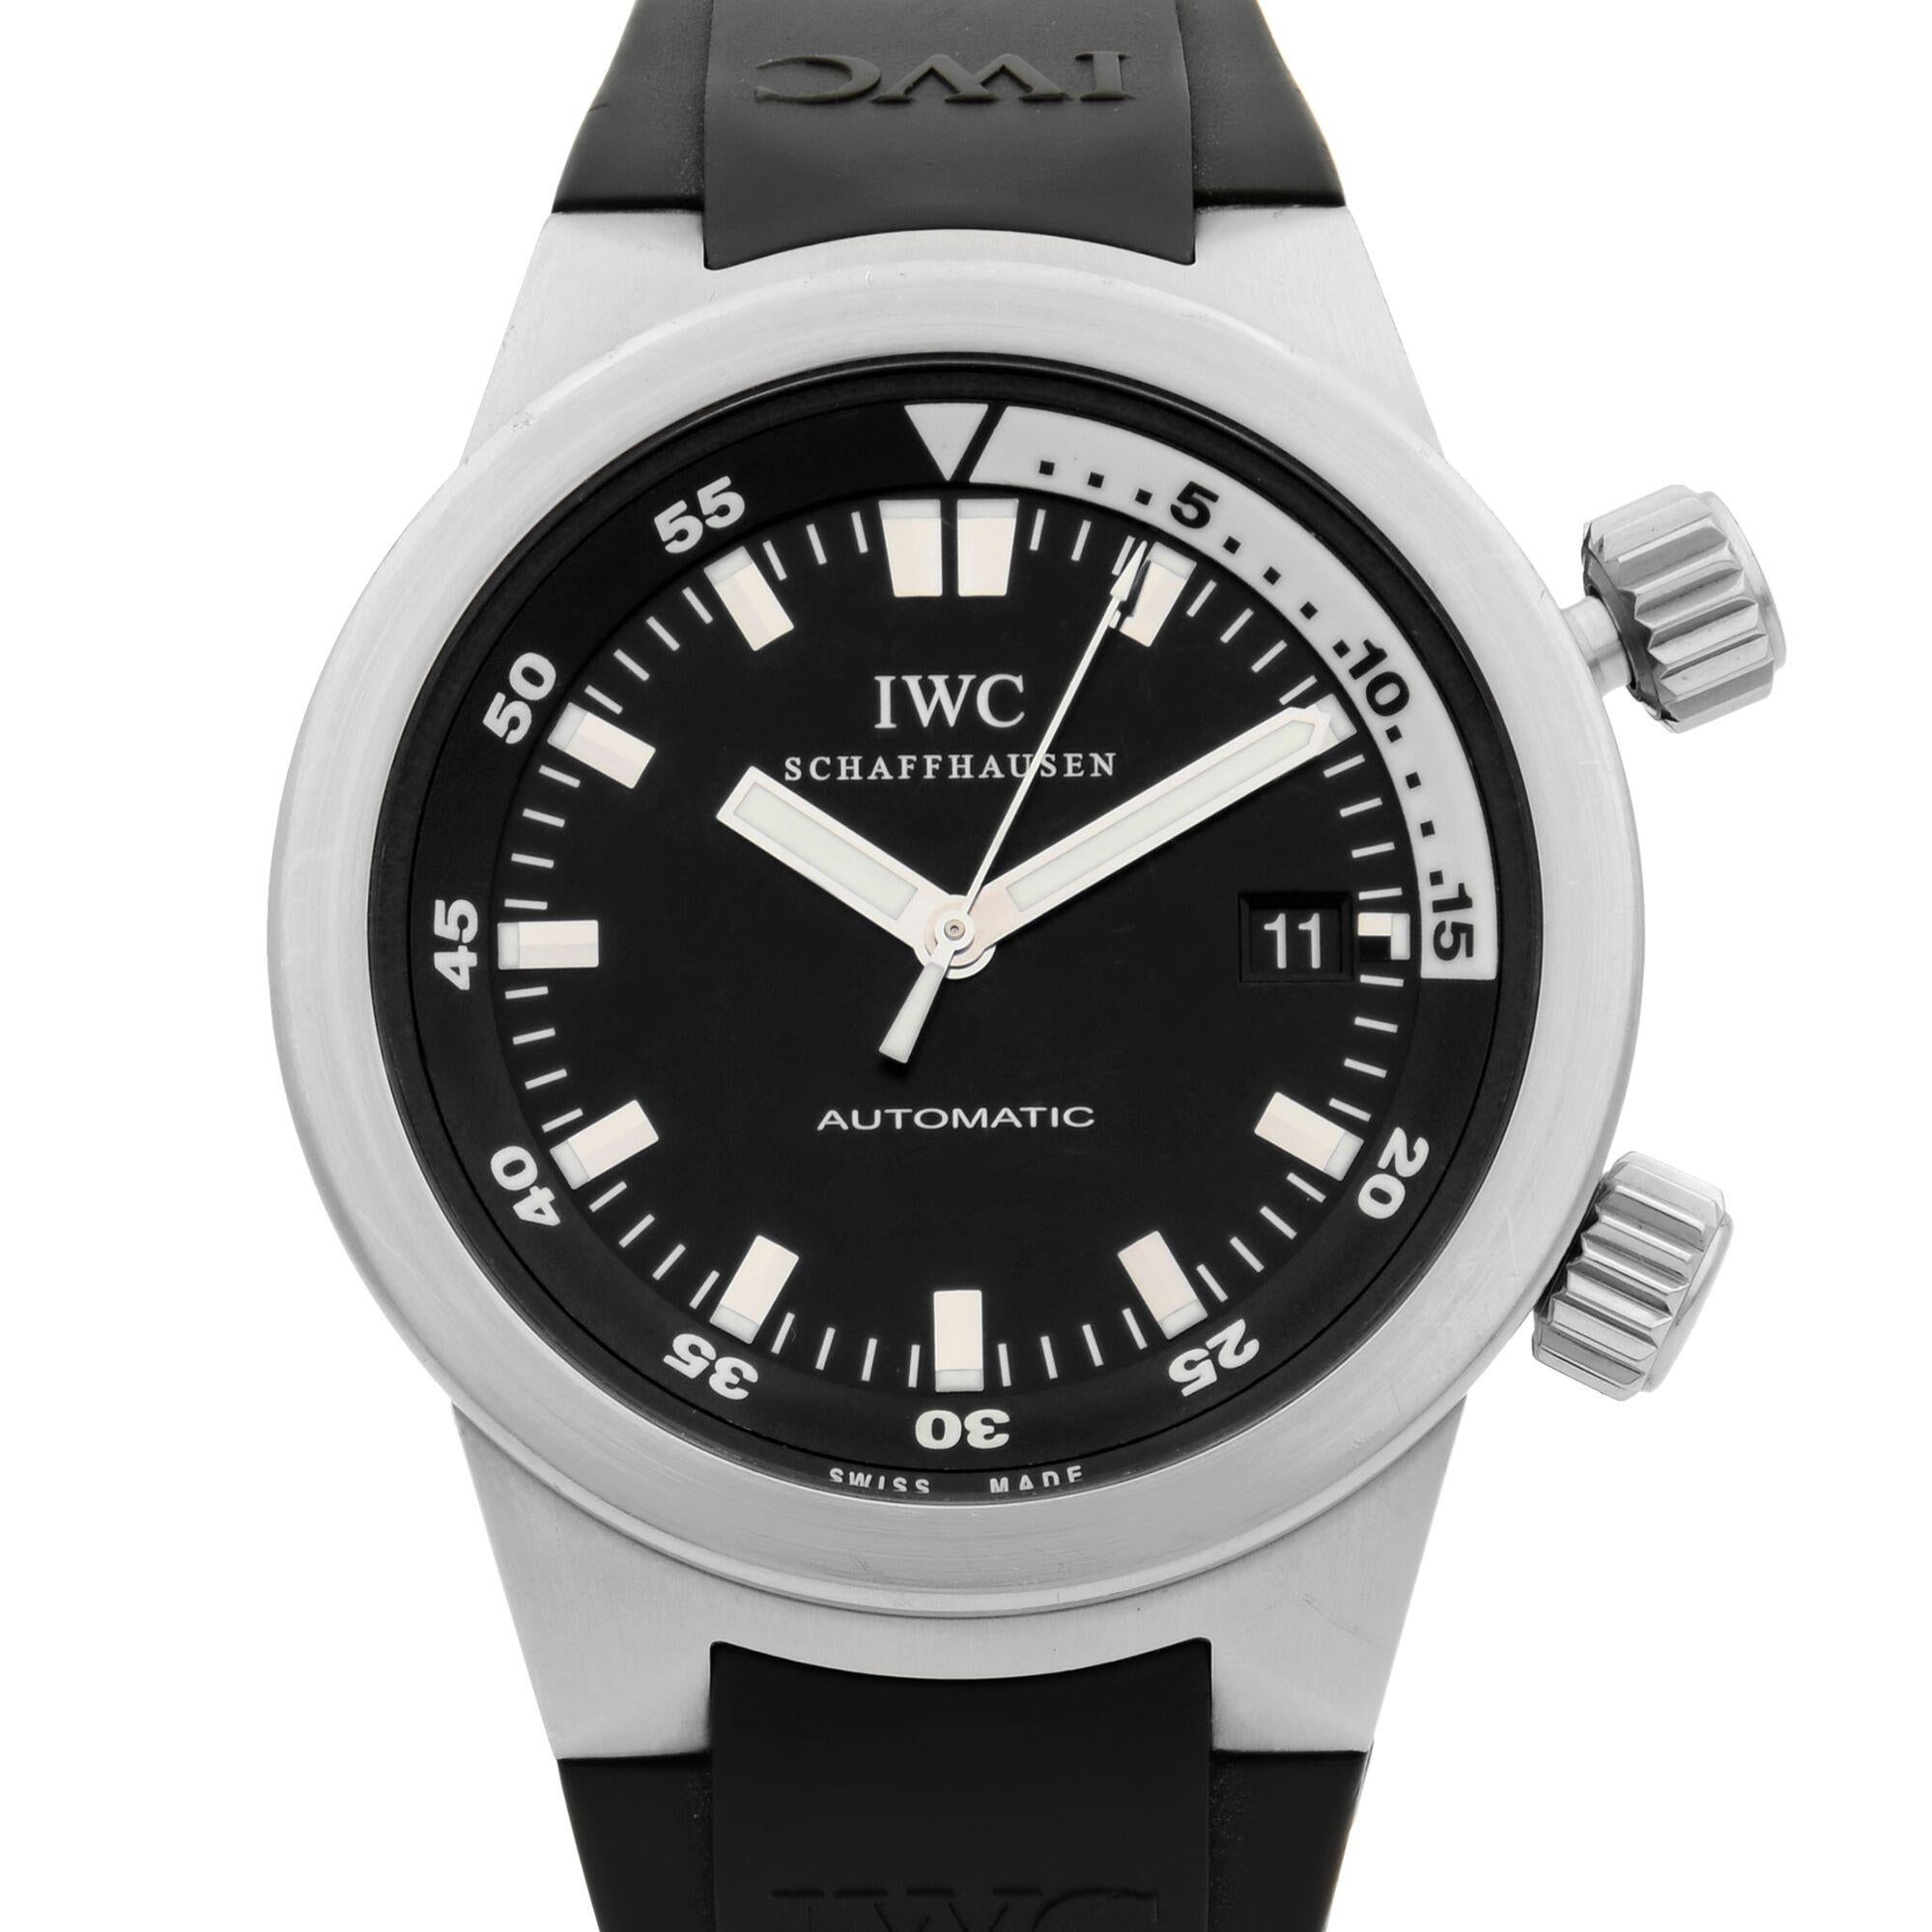 This pre-owned IWC Aquatimer IW3548 is a beautiful men's timepiece that is powered by mechanical (automatic) movement which is cased in a stainless steel case. It has a round shape face, date indicator dial and has hand sticks style markers. It is